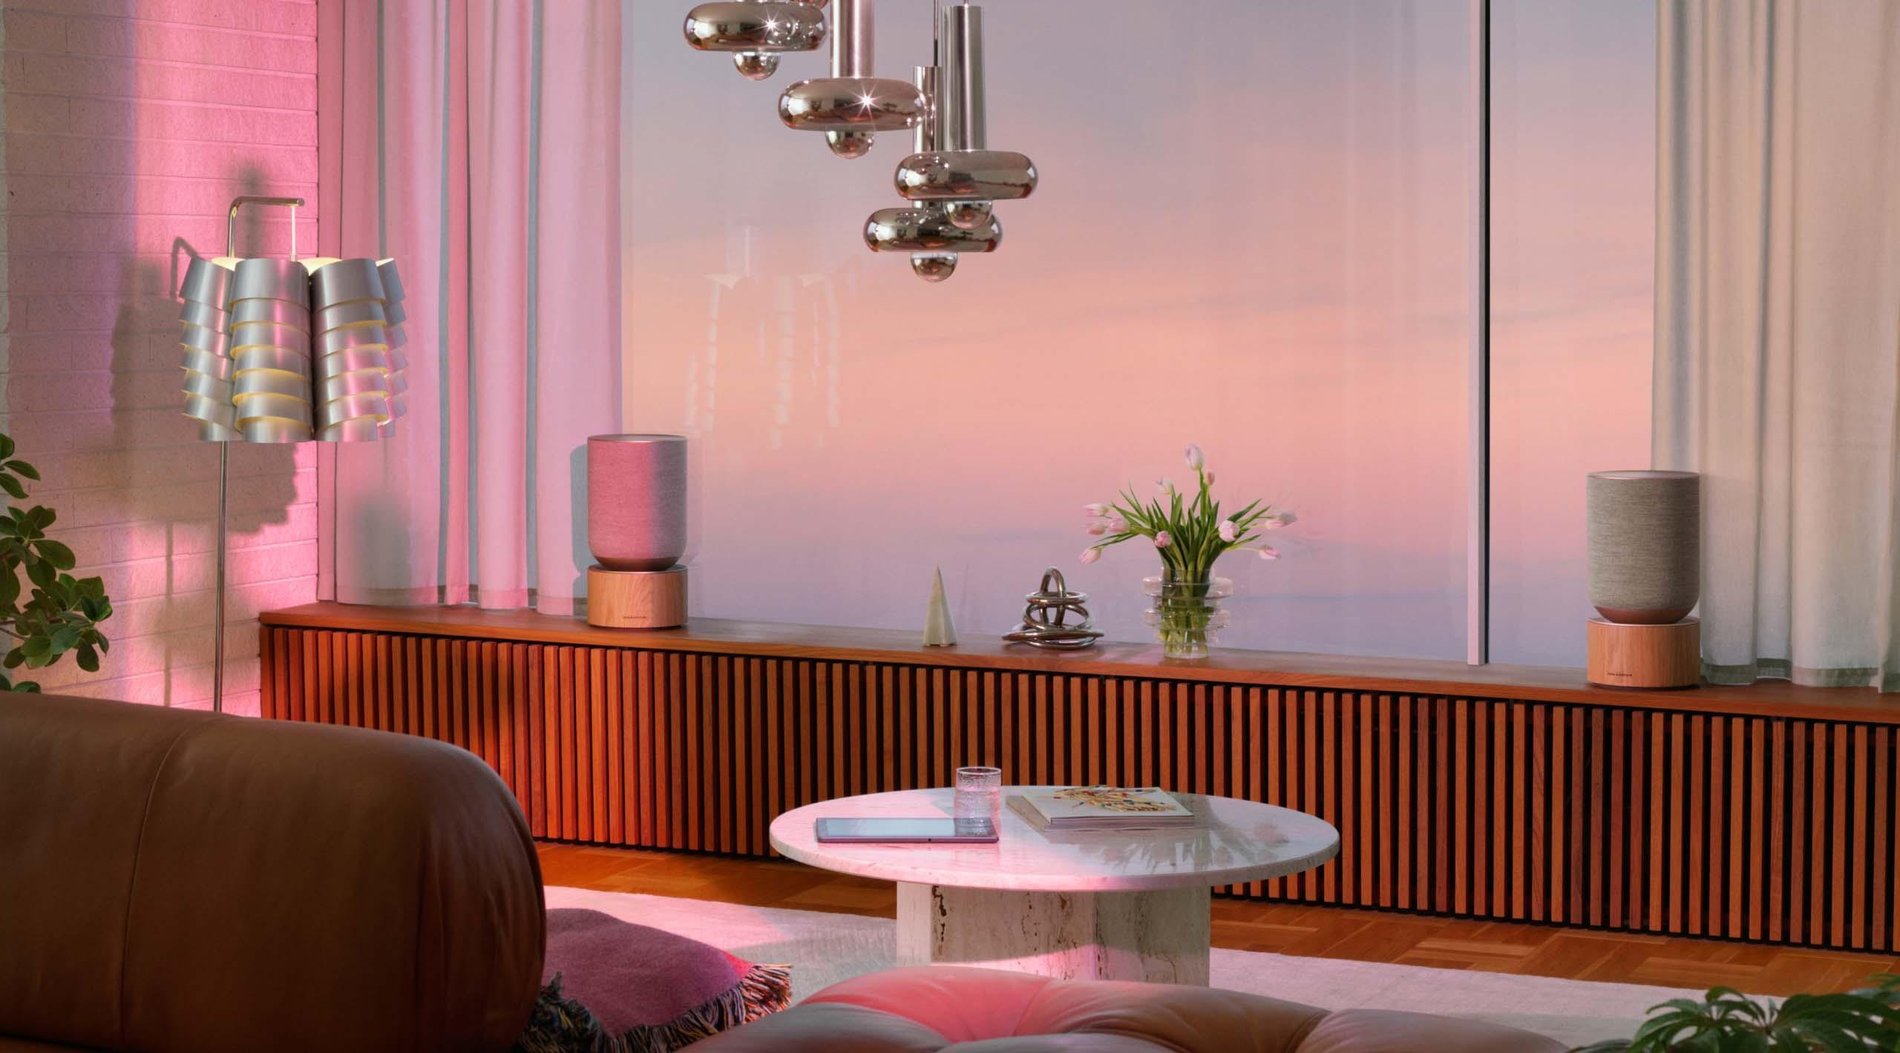 A livingroom with a Home Audio Installation of two Beosound Balance multiroom speakers